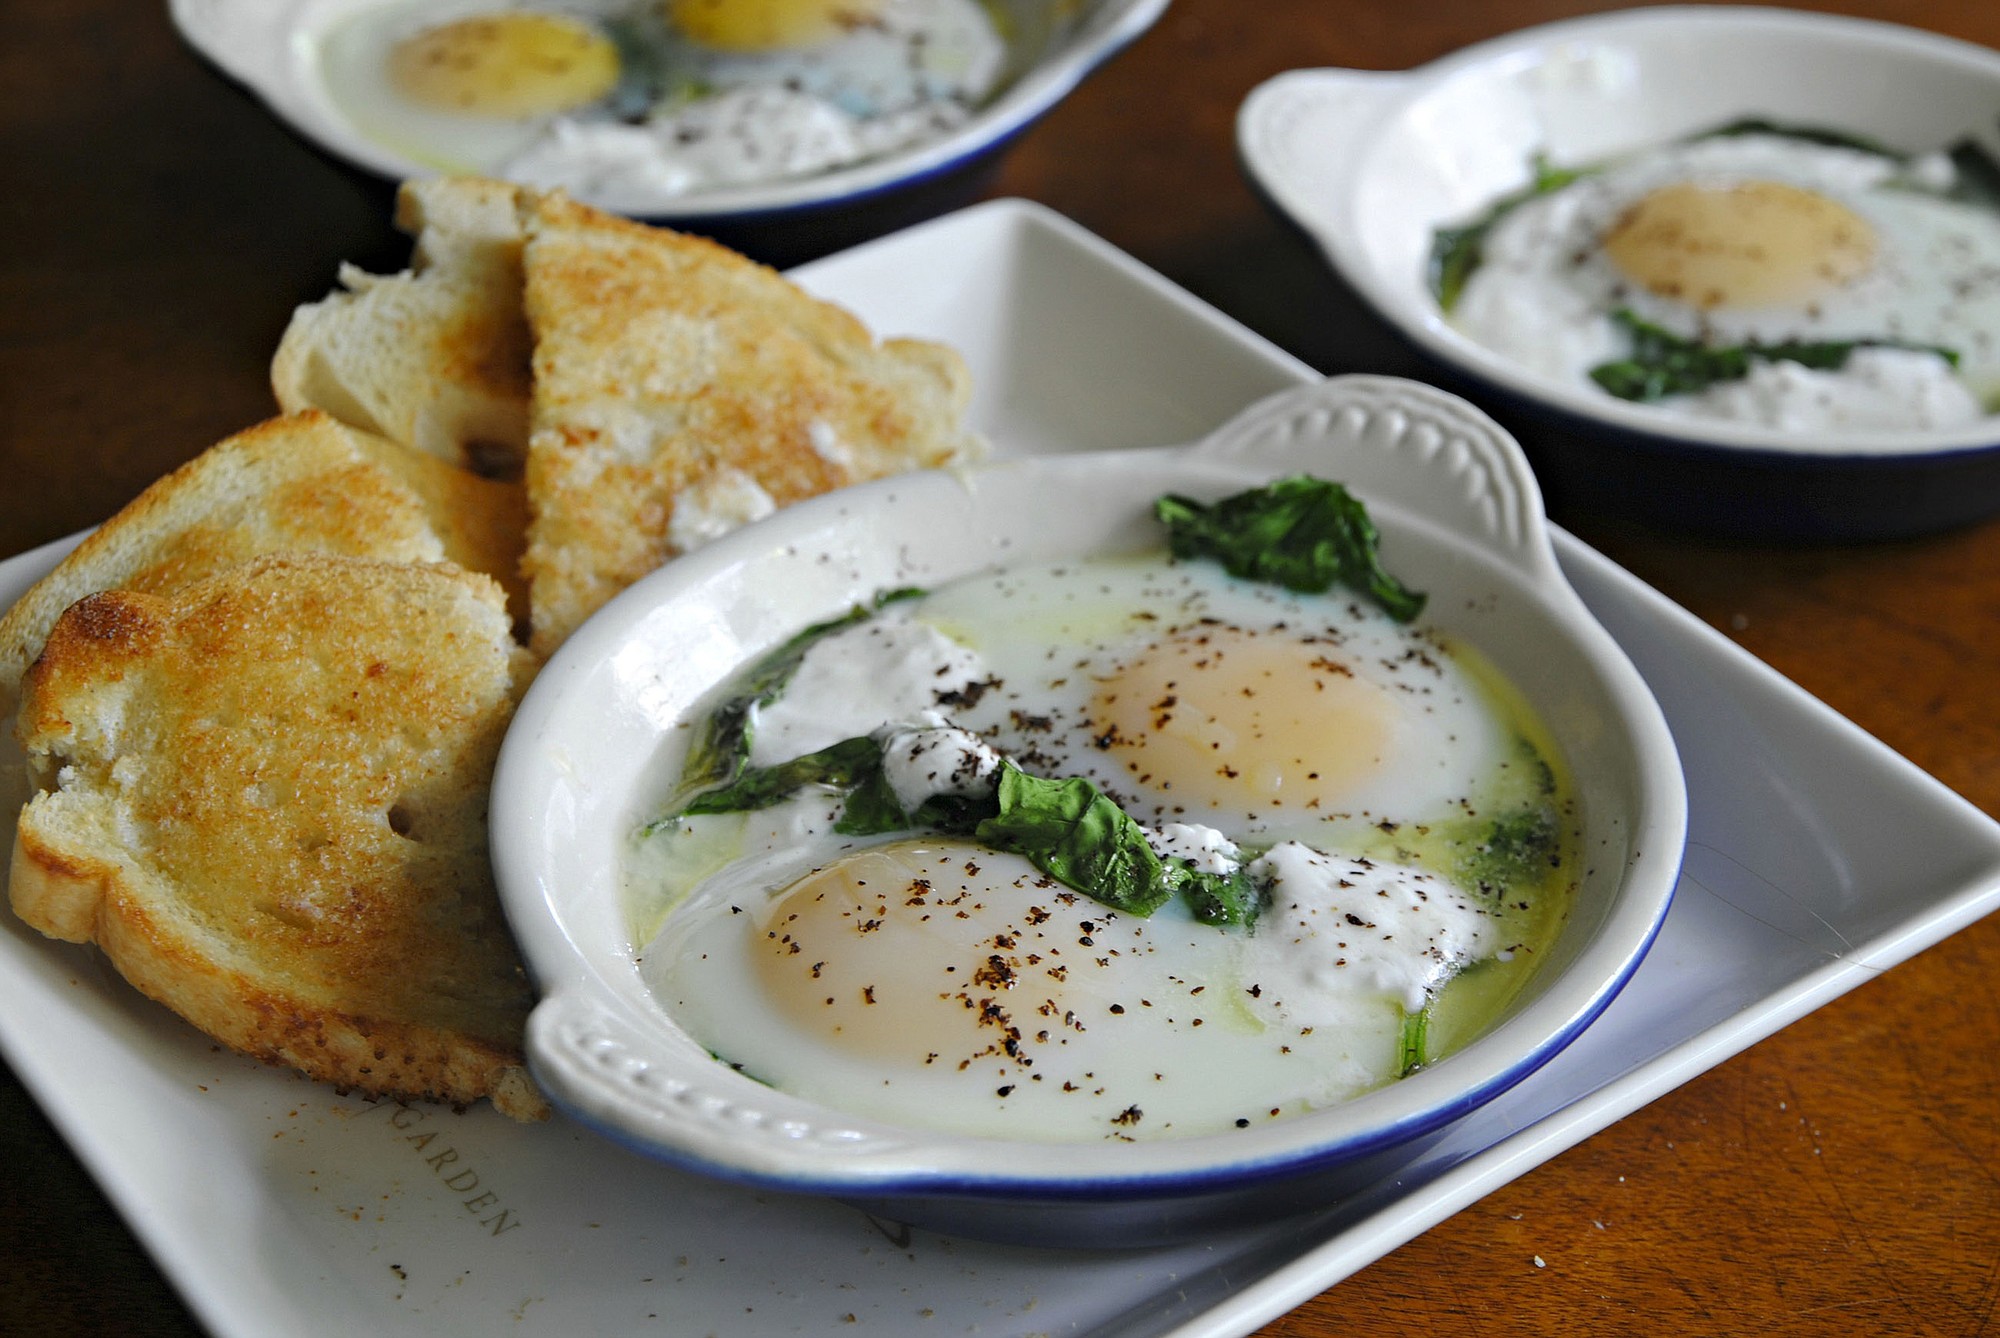 Baked eggs with Spinach, Yogurt and Sumac can be a rustic brunch or dinner.